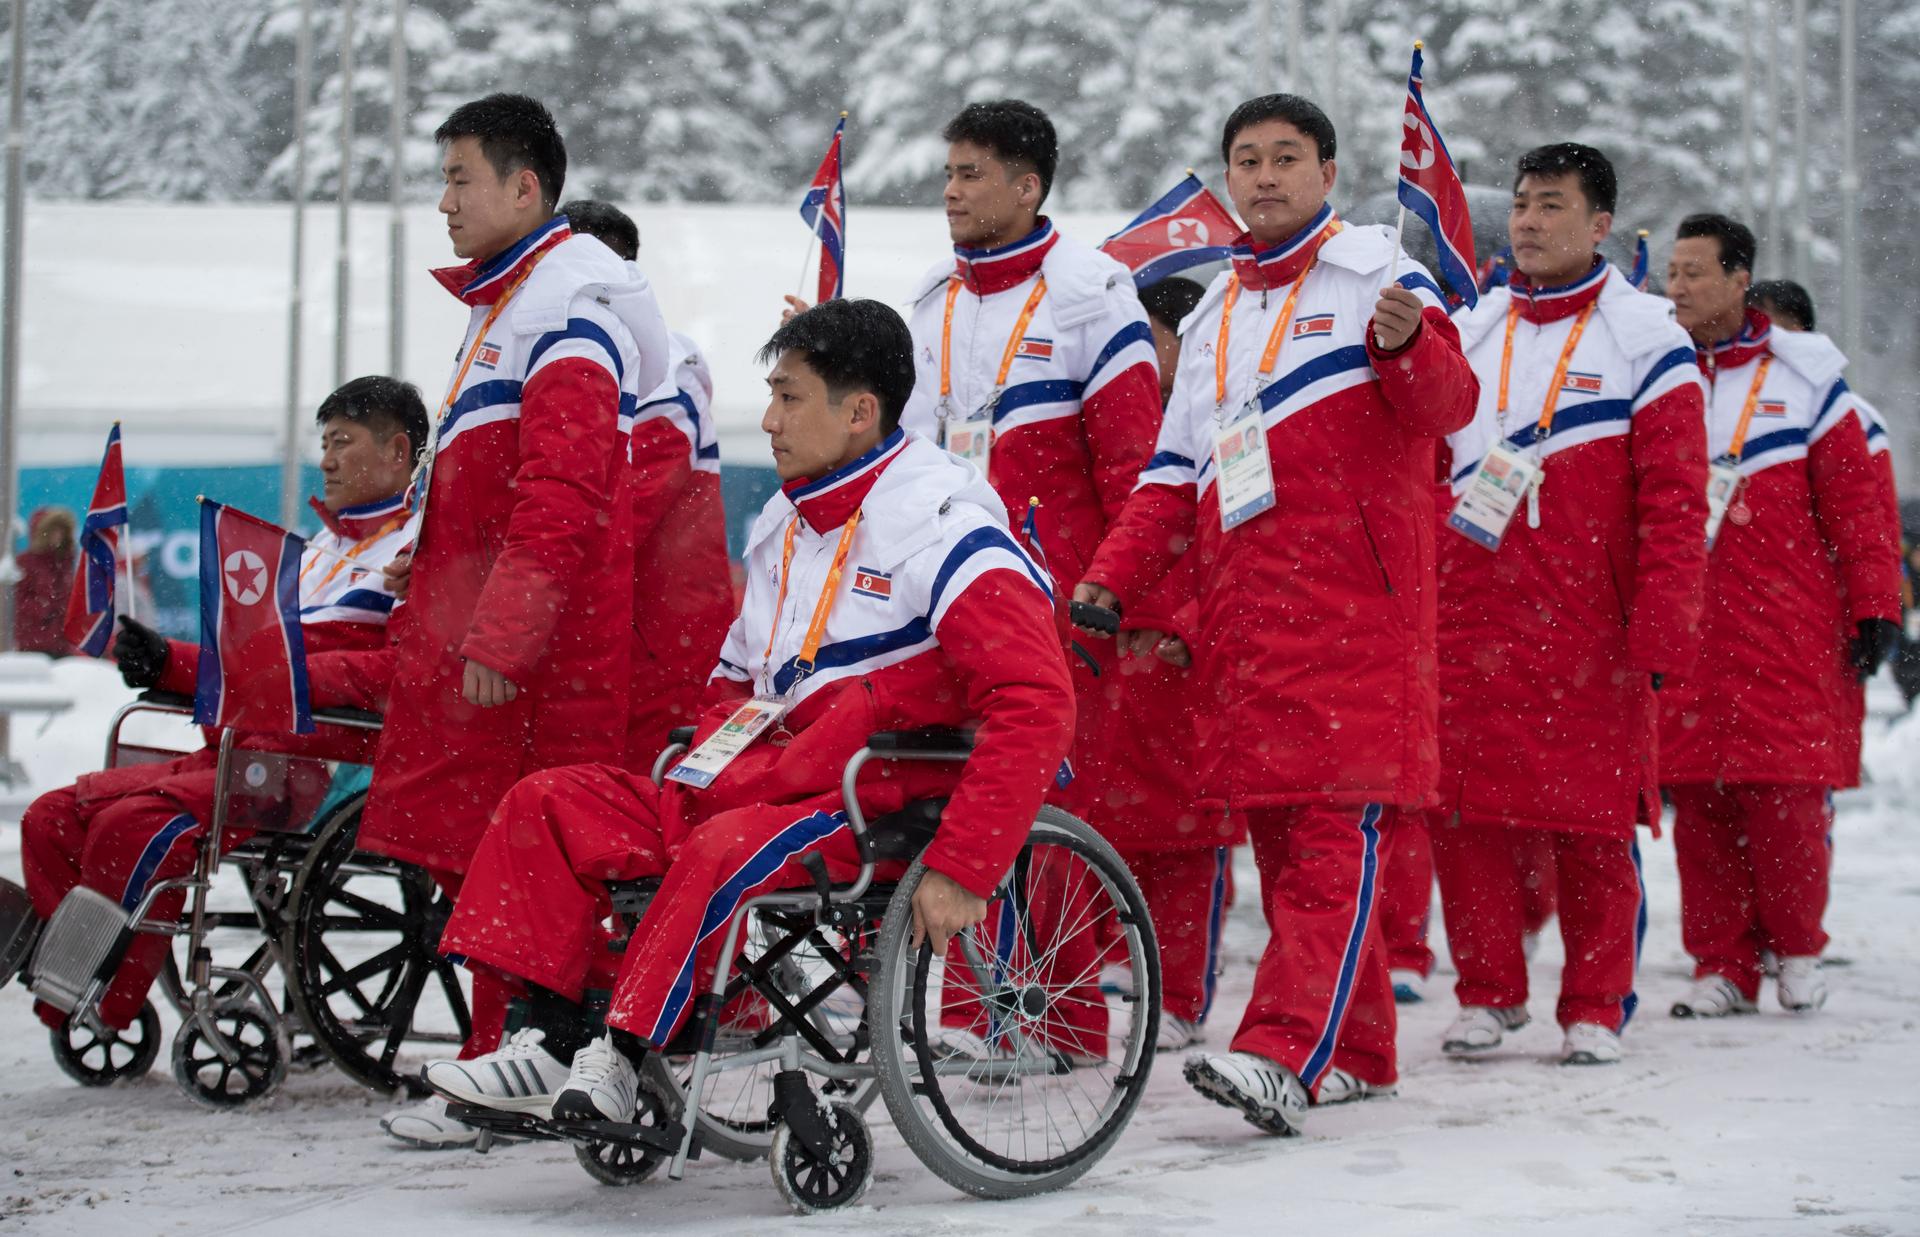 The delegation and the team of North Korea arrive at The Paralympic Village in Pyeongchang, South Korea, wearing red jumpsuits, March 8, 2018. 